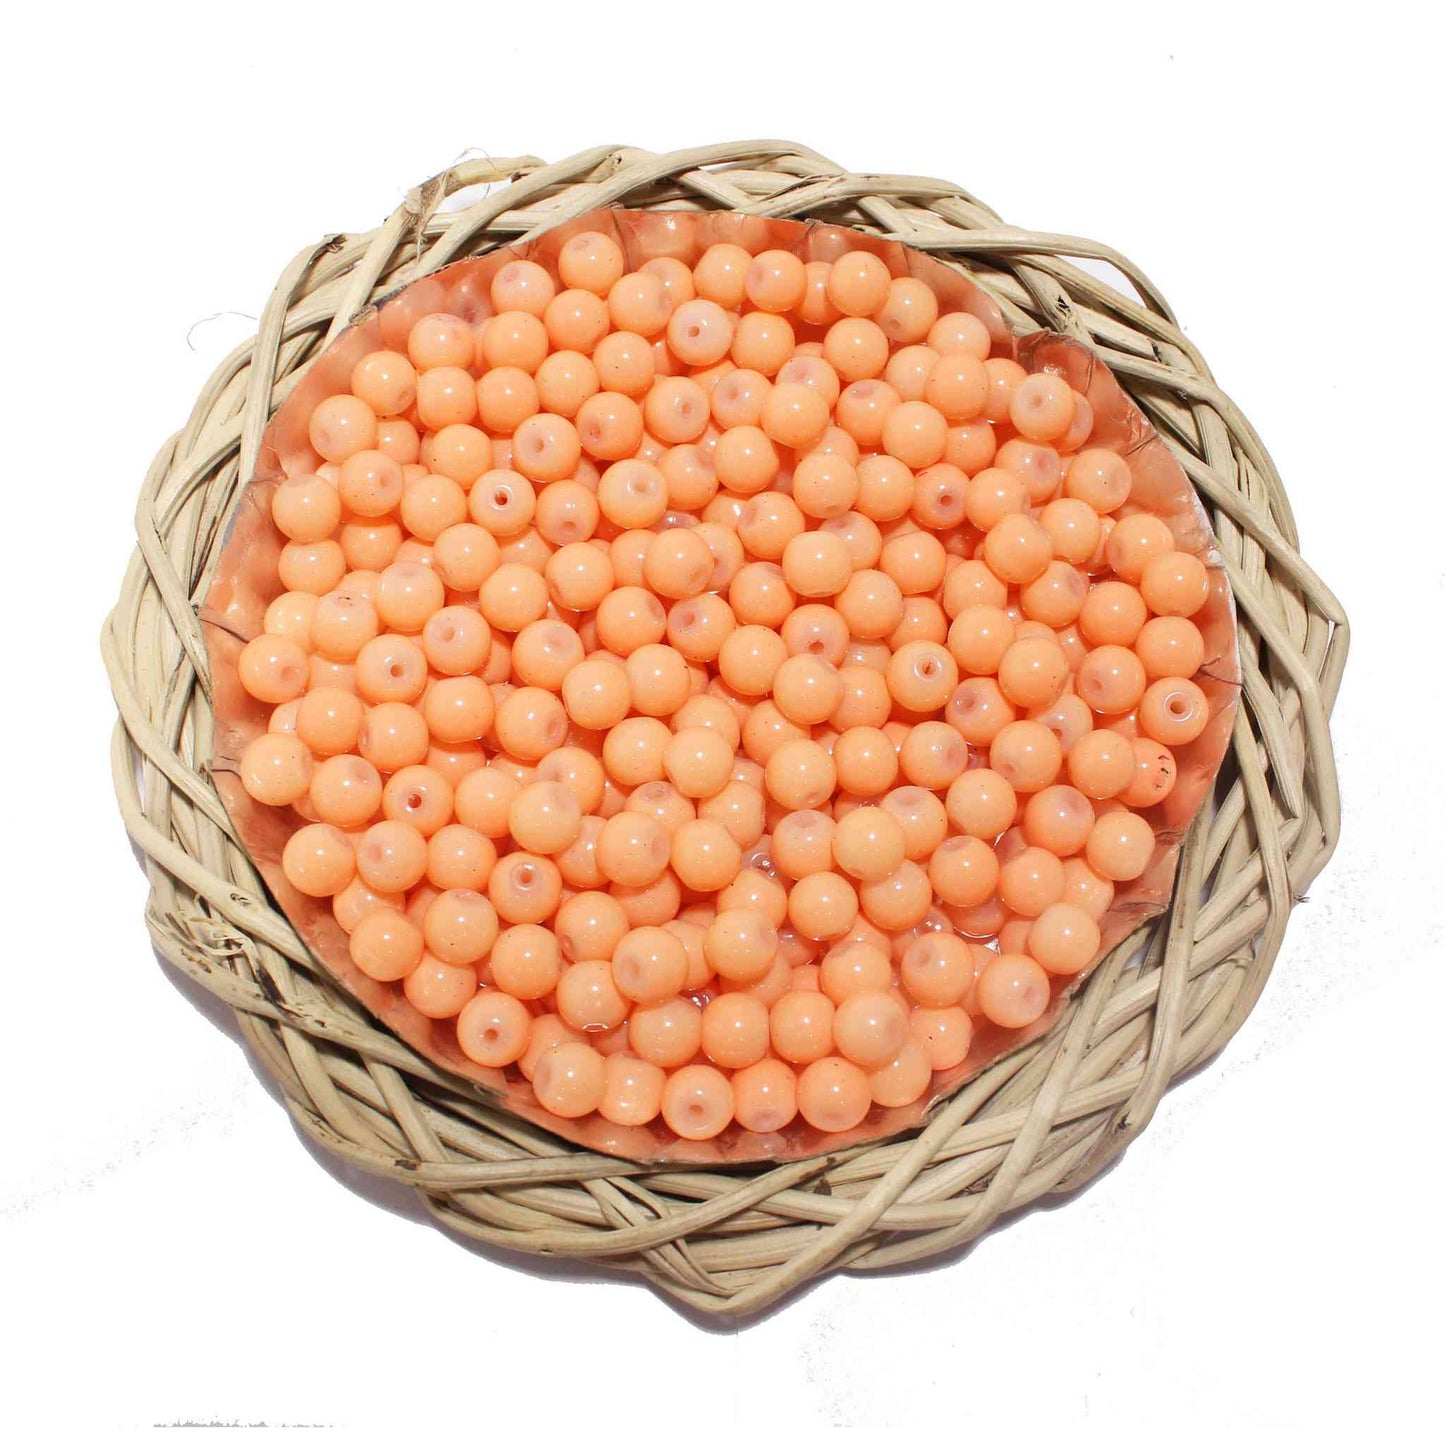 Premium quality Round shape Glass Beads for DIY Craft, Trousseau Packing or Decoration - Design 725, 8mm, Light Salmon - Indian Petals